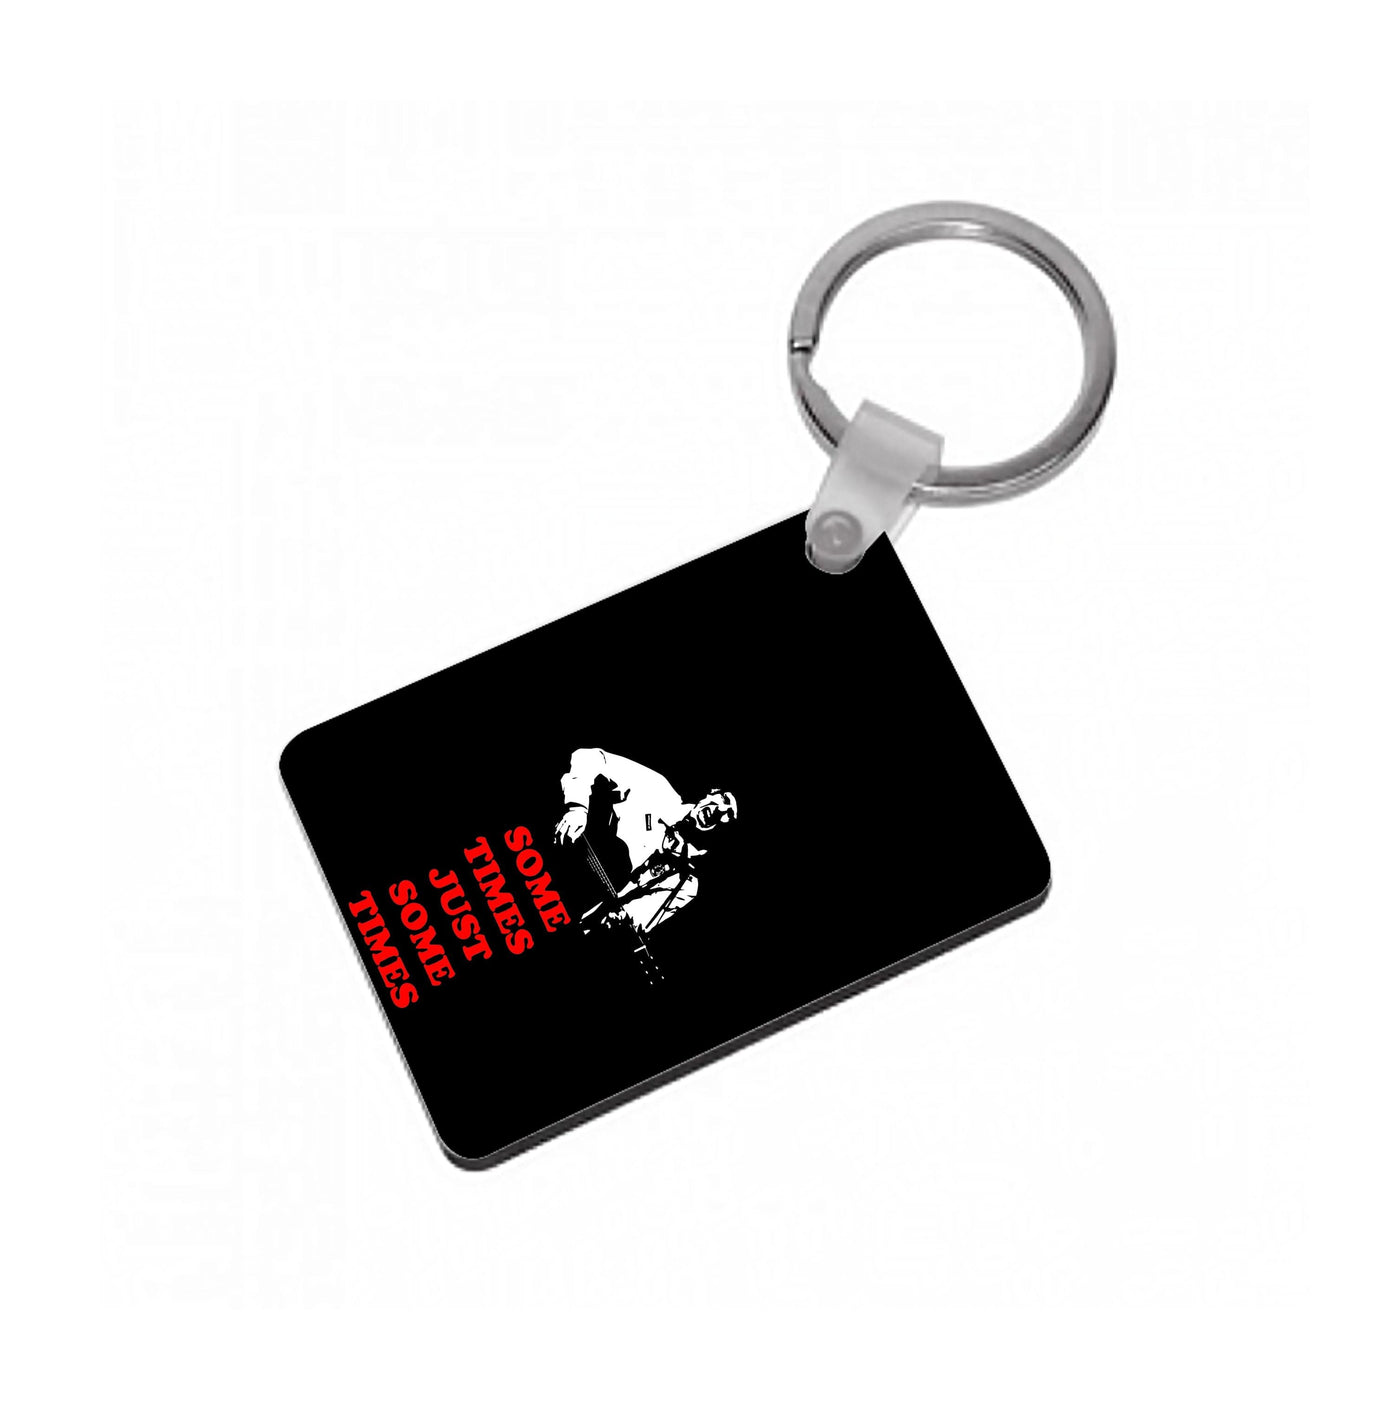 Some Times Just Some Times - Festival Keyring